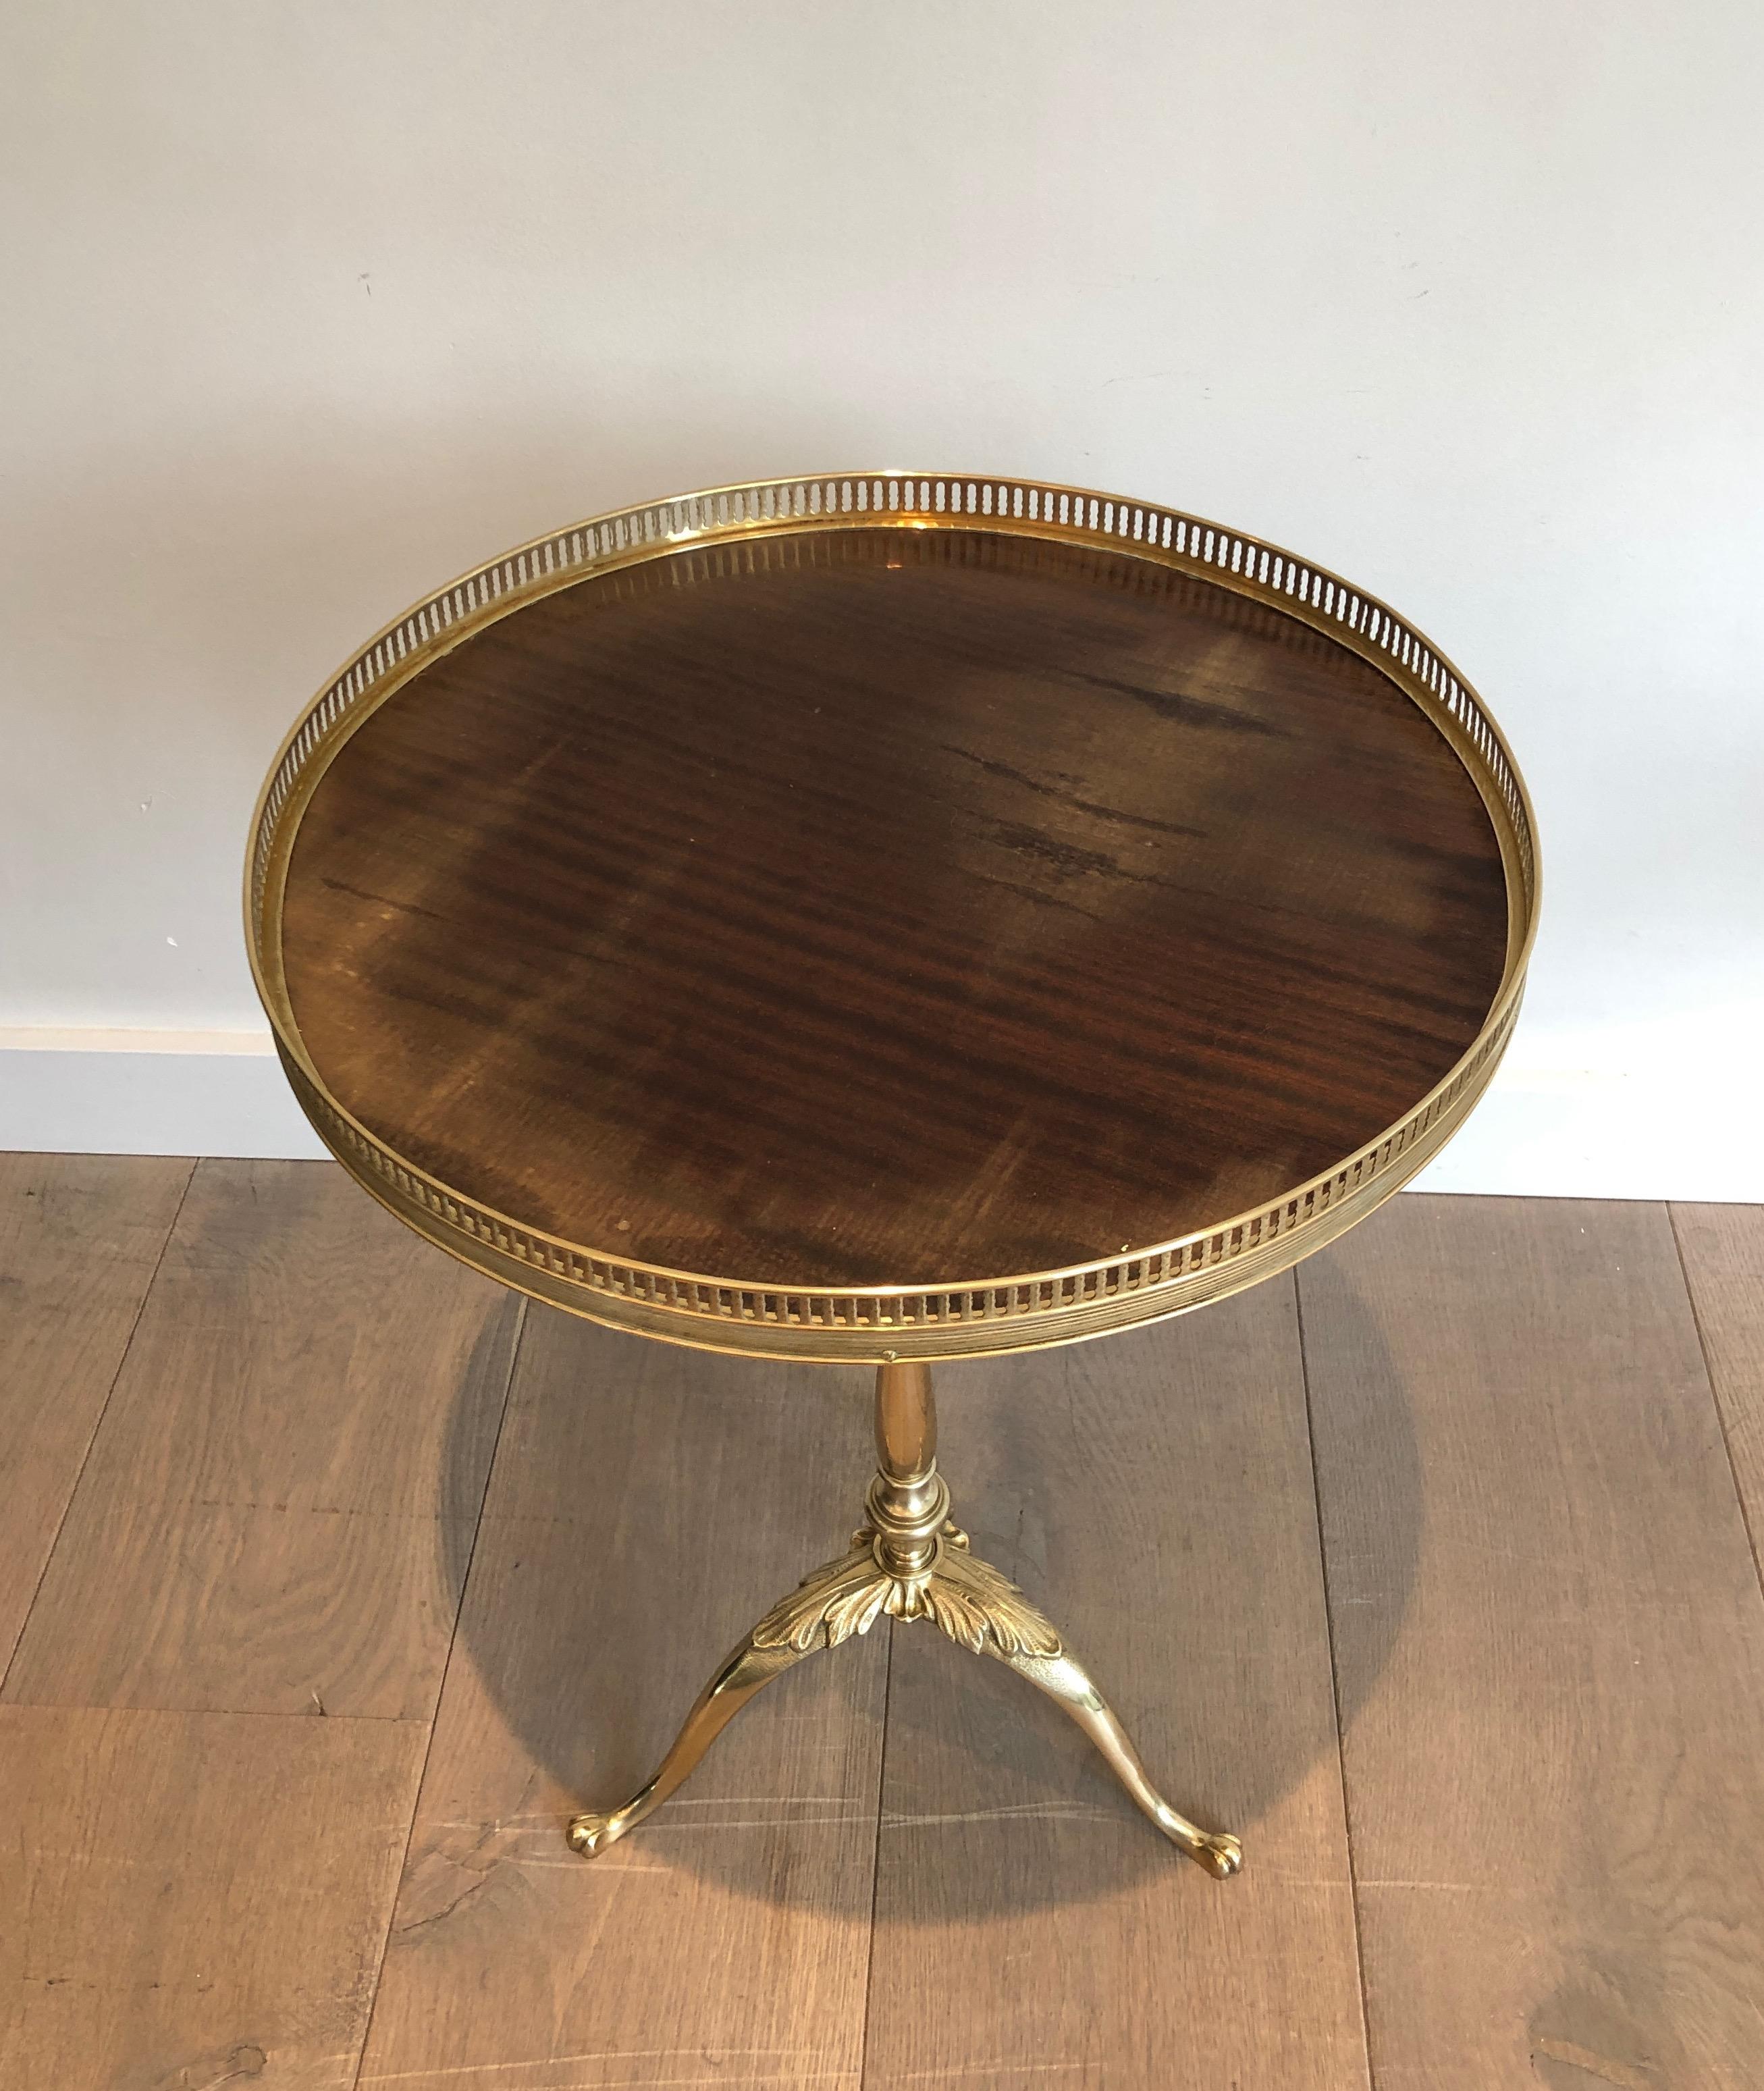 French Attributed to Maison Jansen, Neoclassical Style Brass and Mahogany Side Table